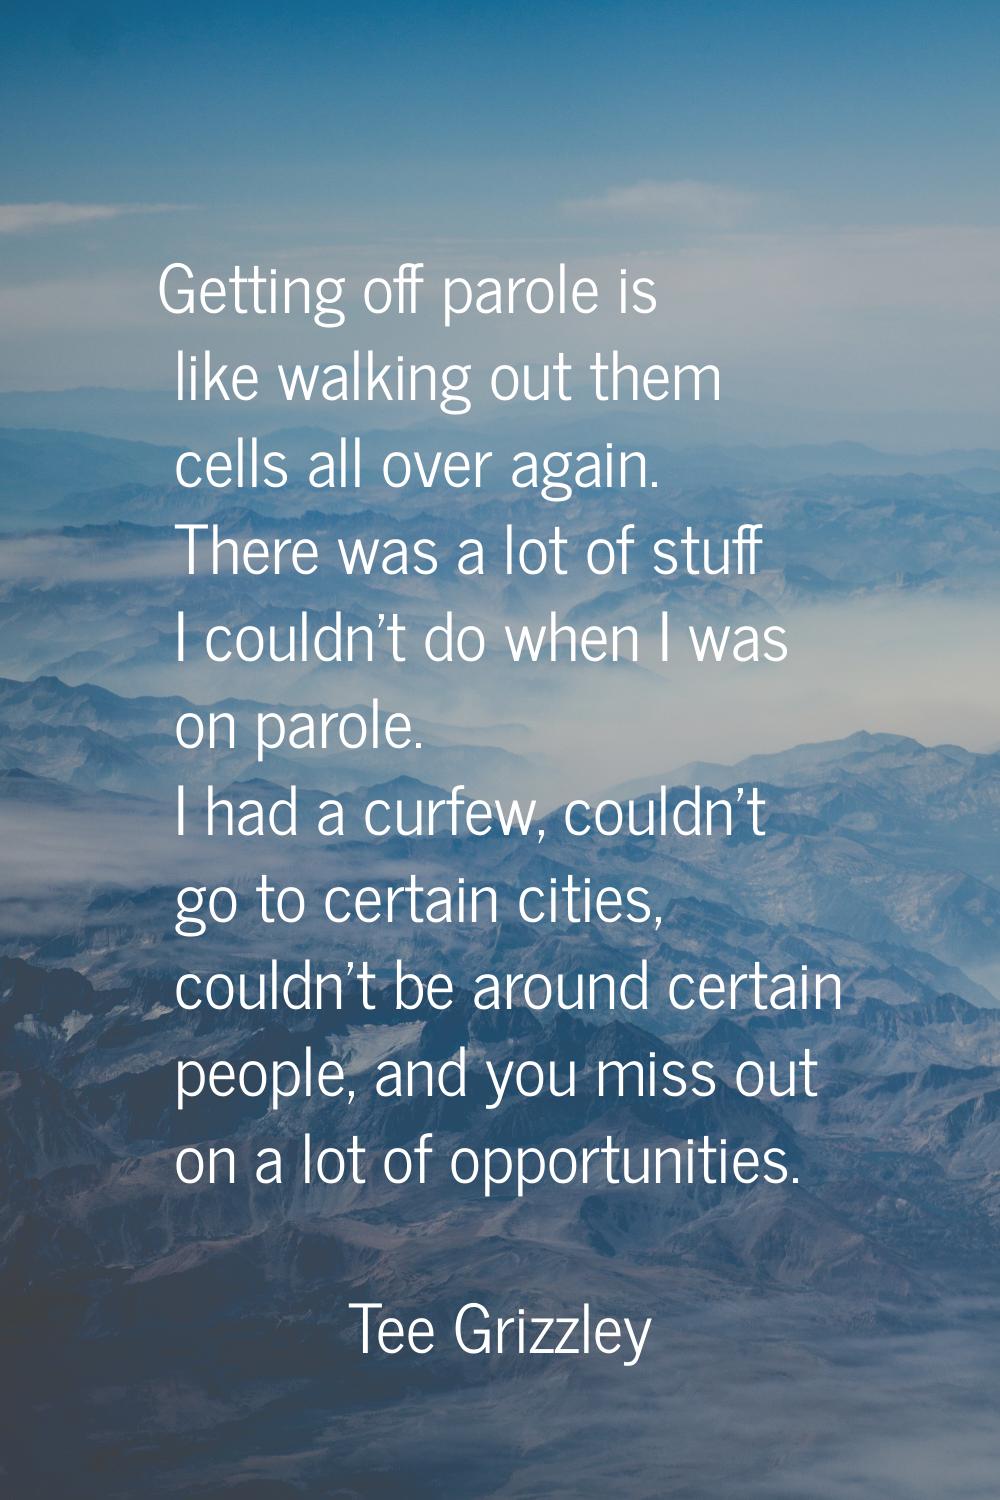 Getting off parole is like walking out them cells all over again. There was a lot of stuff I couldn